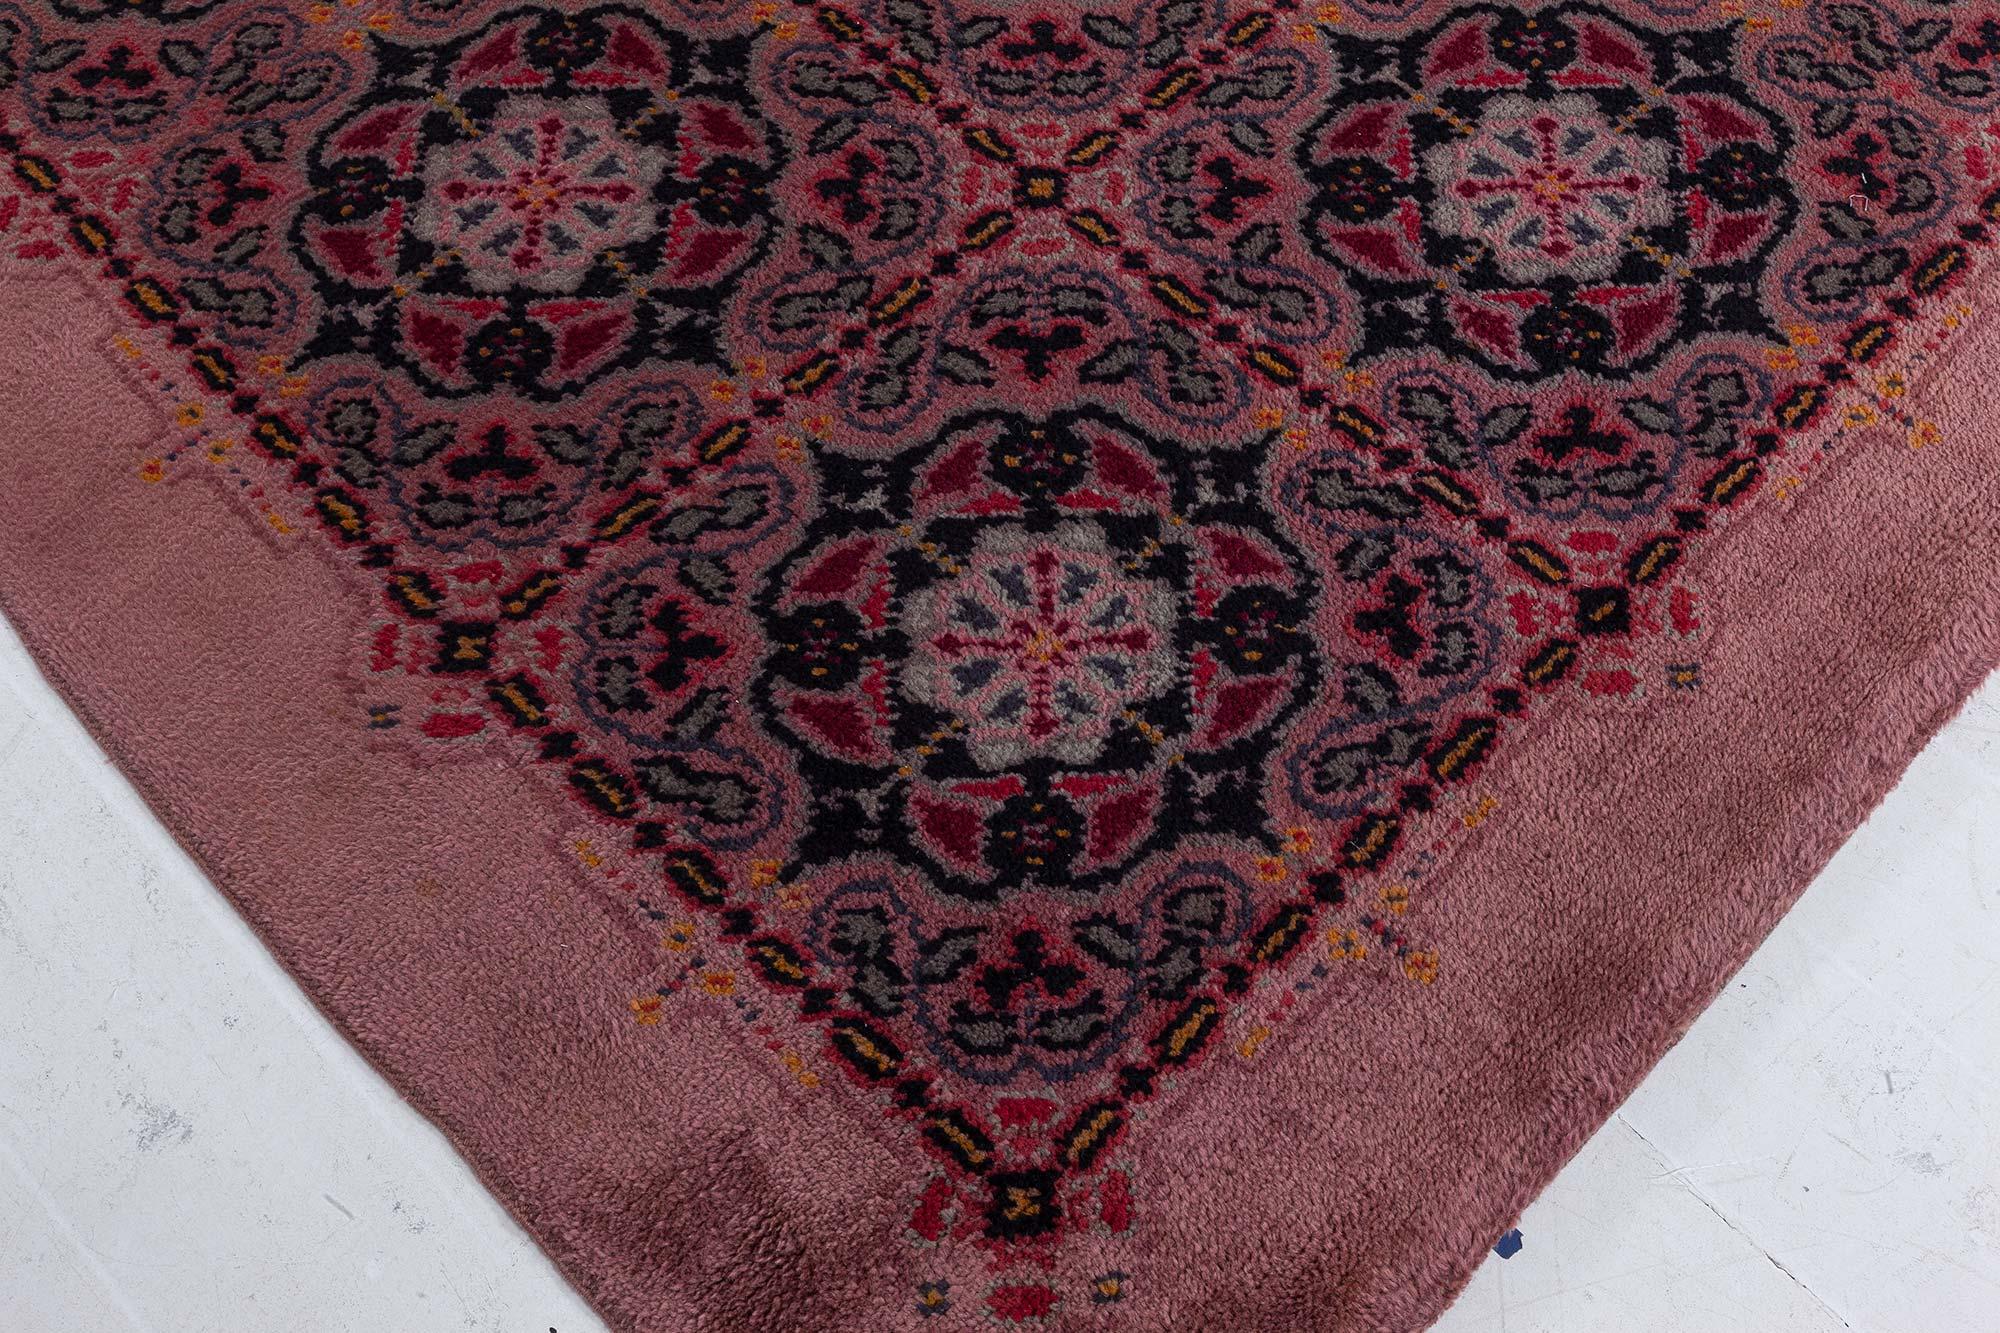 20th Century Antique Amsterdam School Design Rug Attributed To KCP De Bazel Executed by KVT For Sale